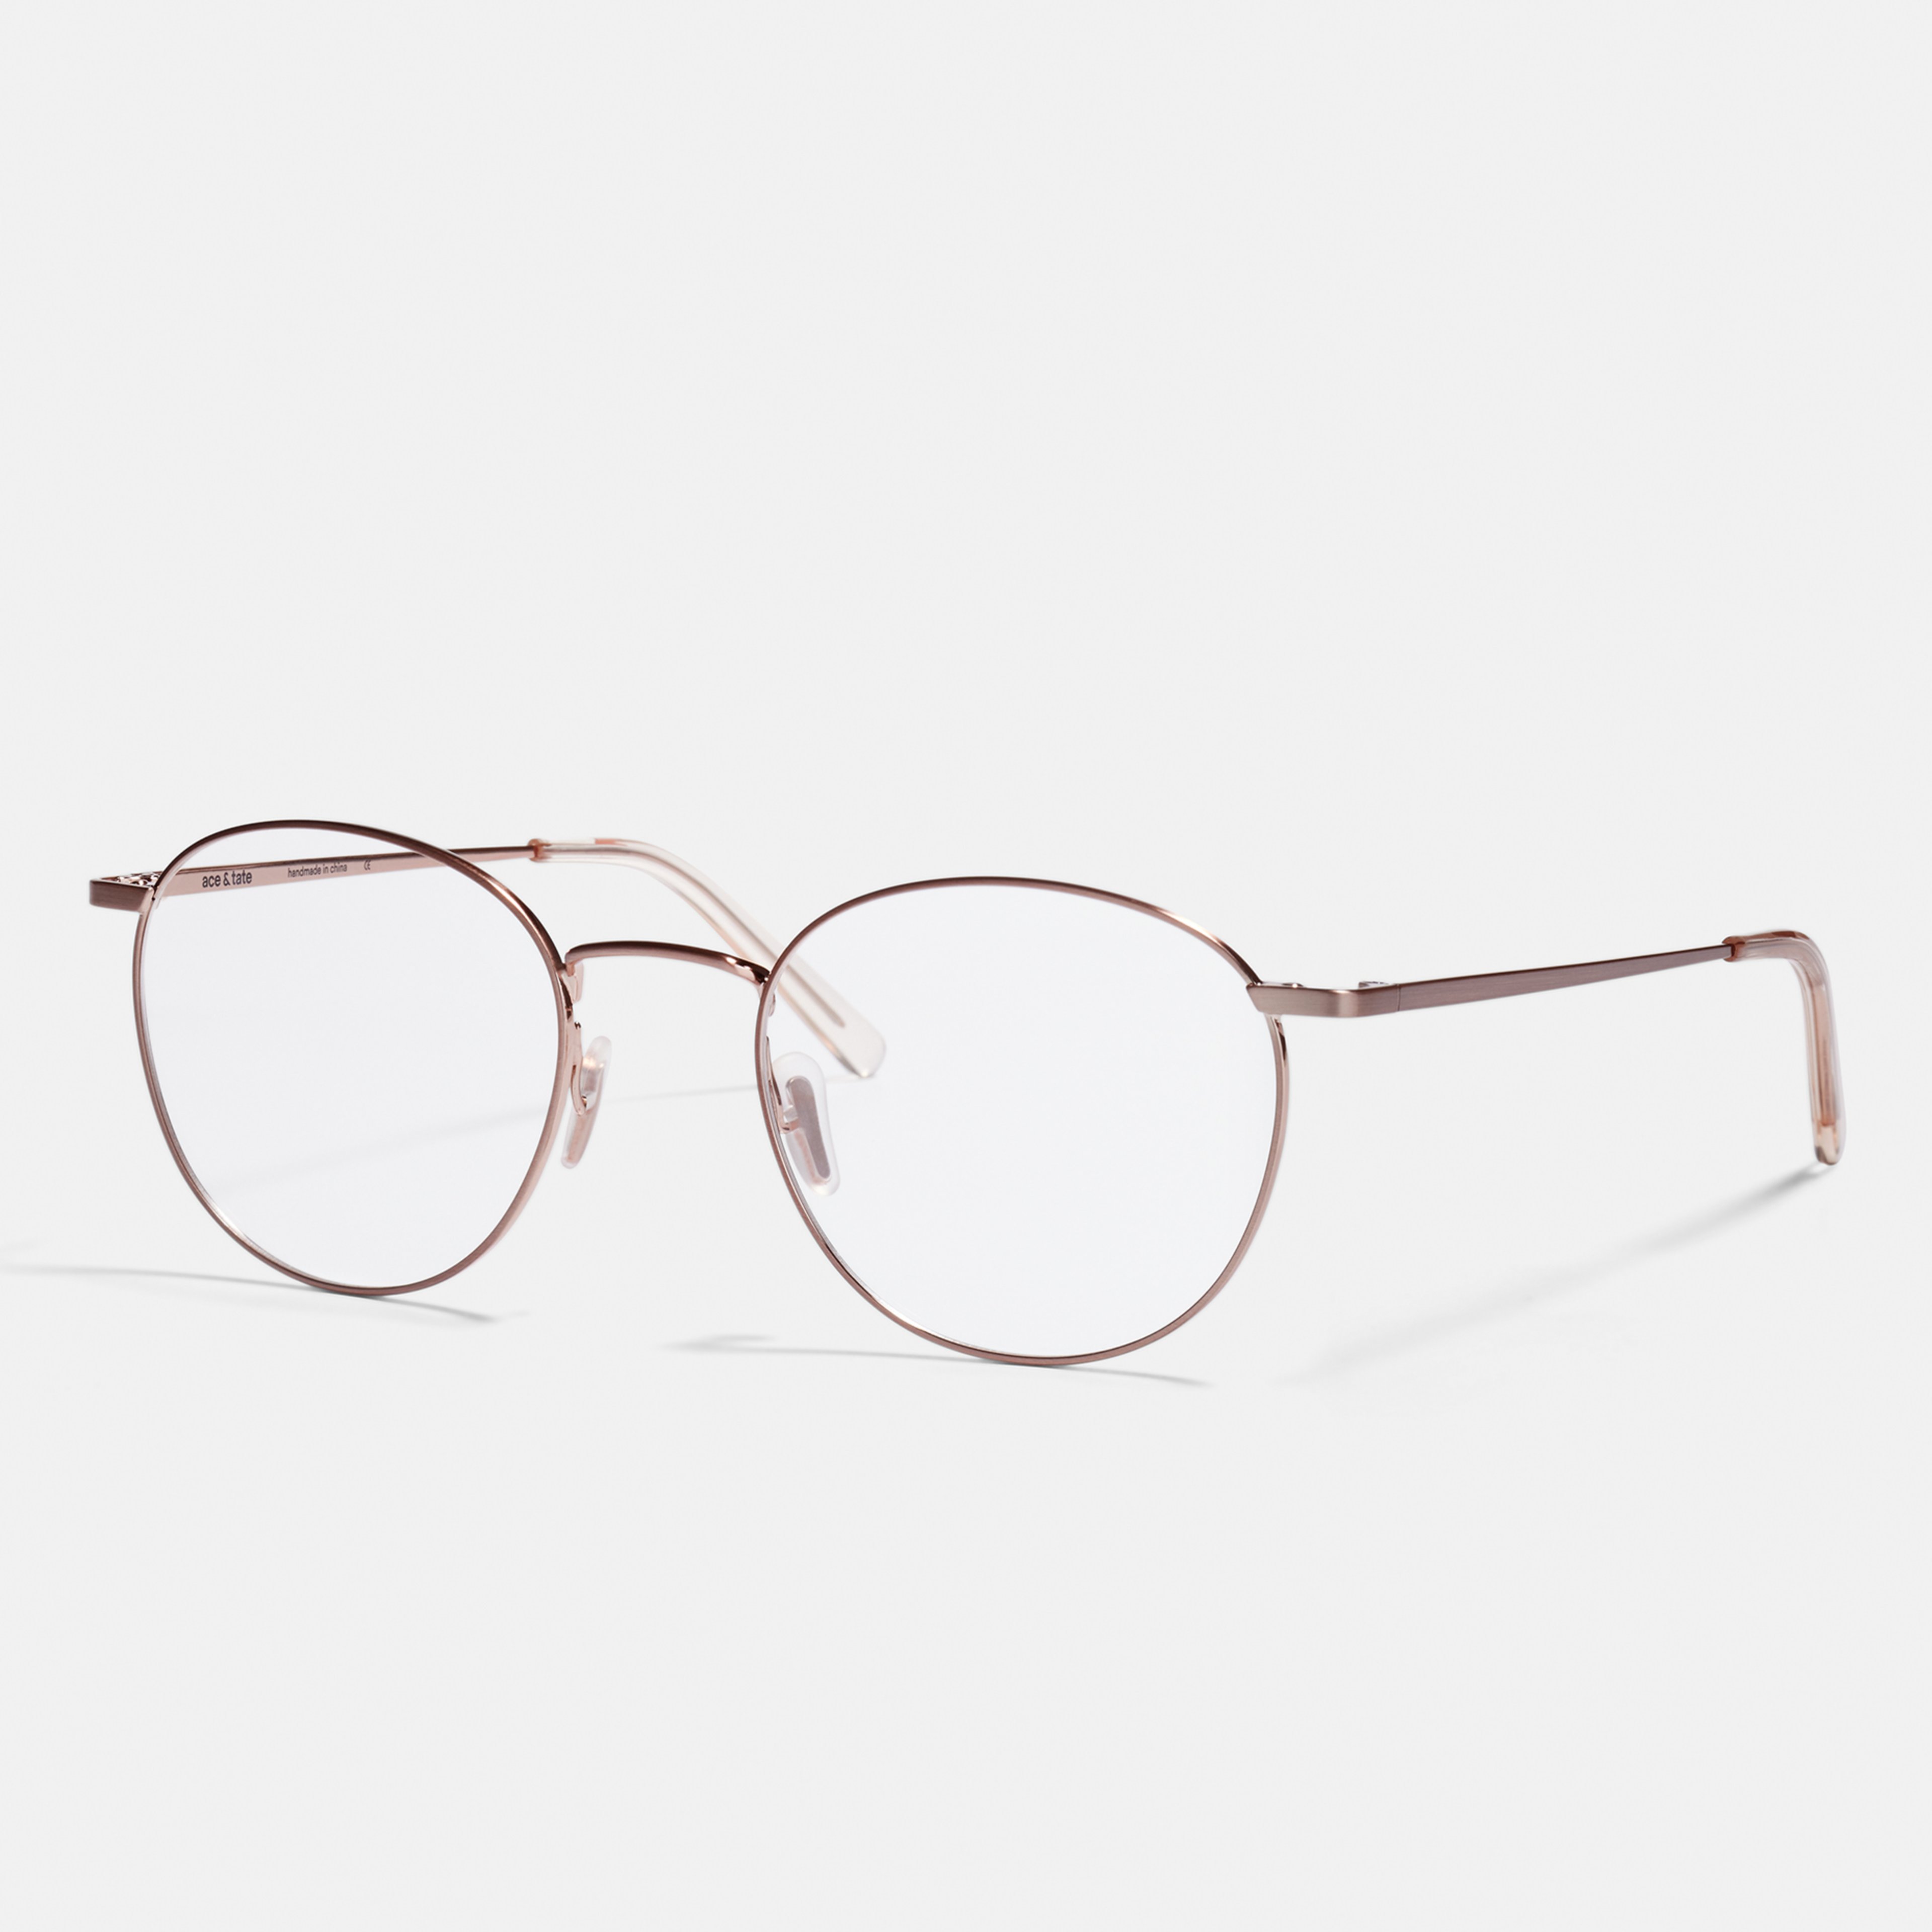 Ace & Tate Glasses | Round Metal in Pink